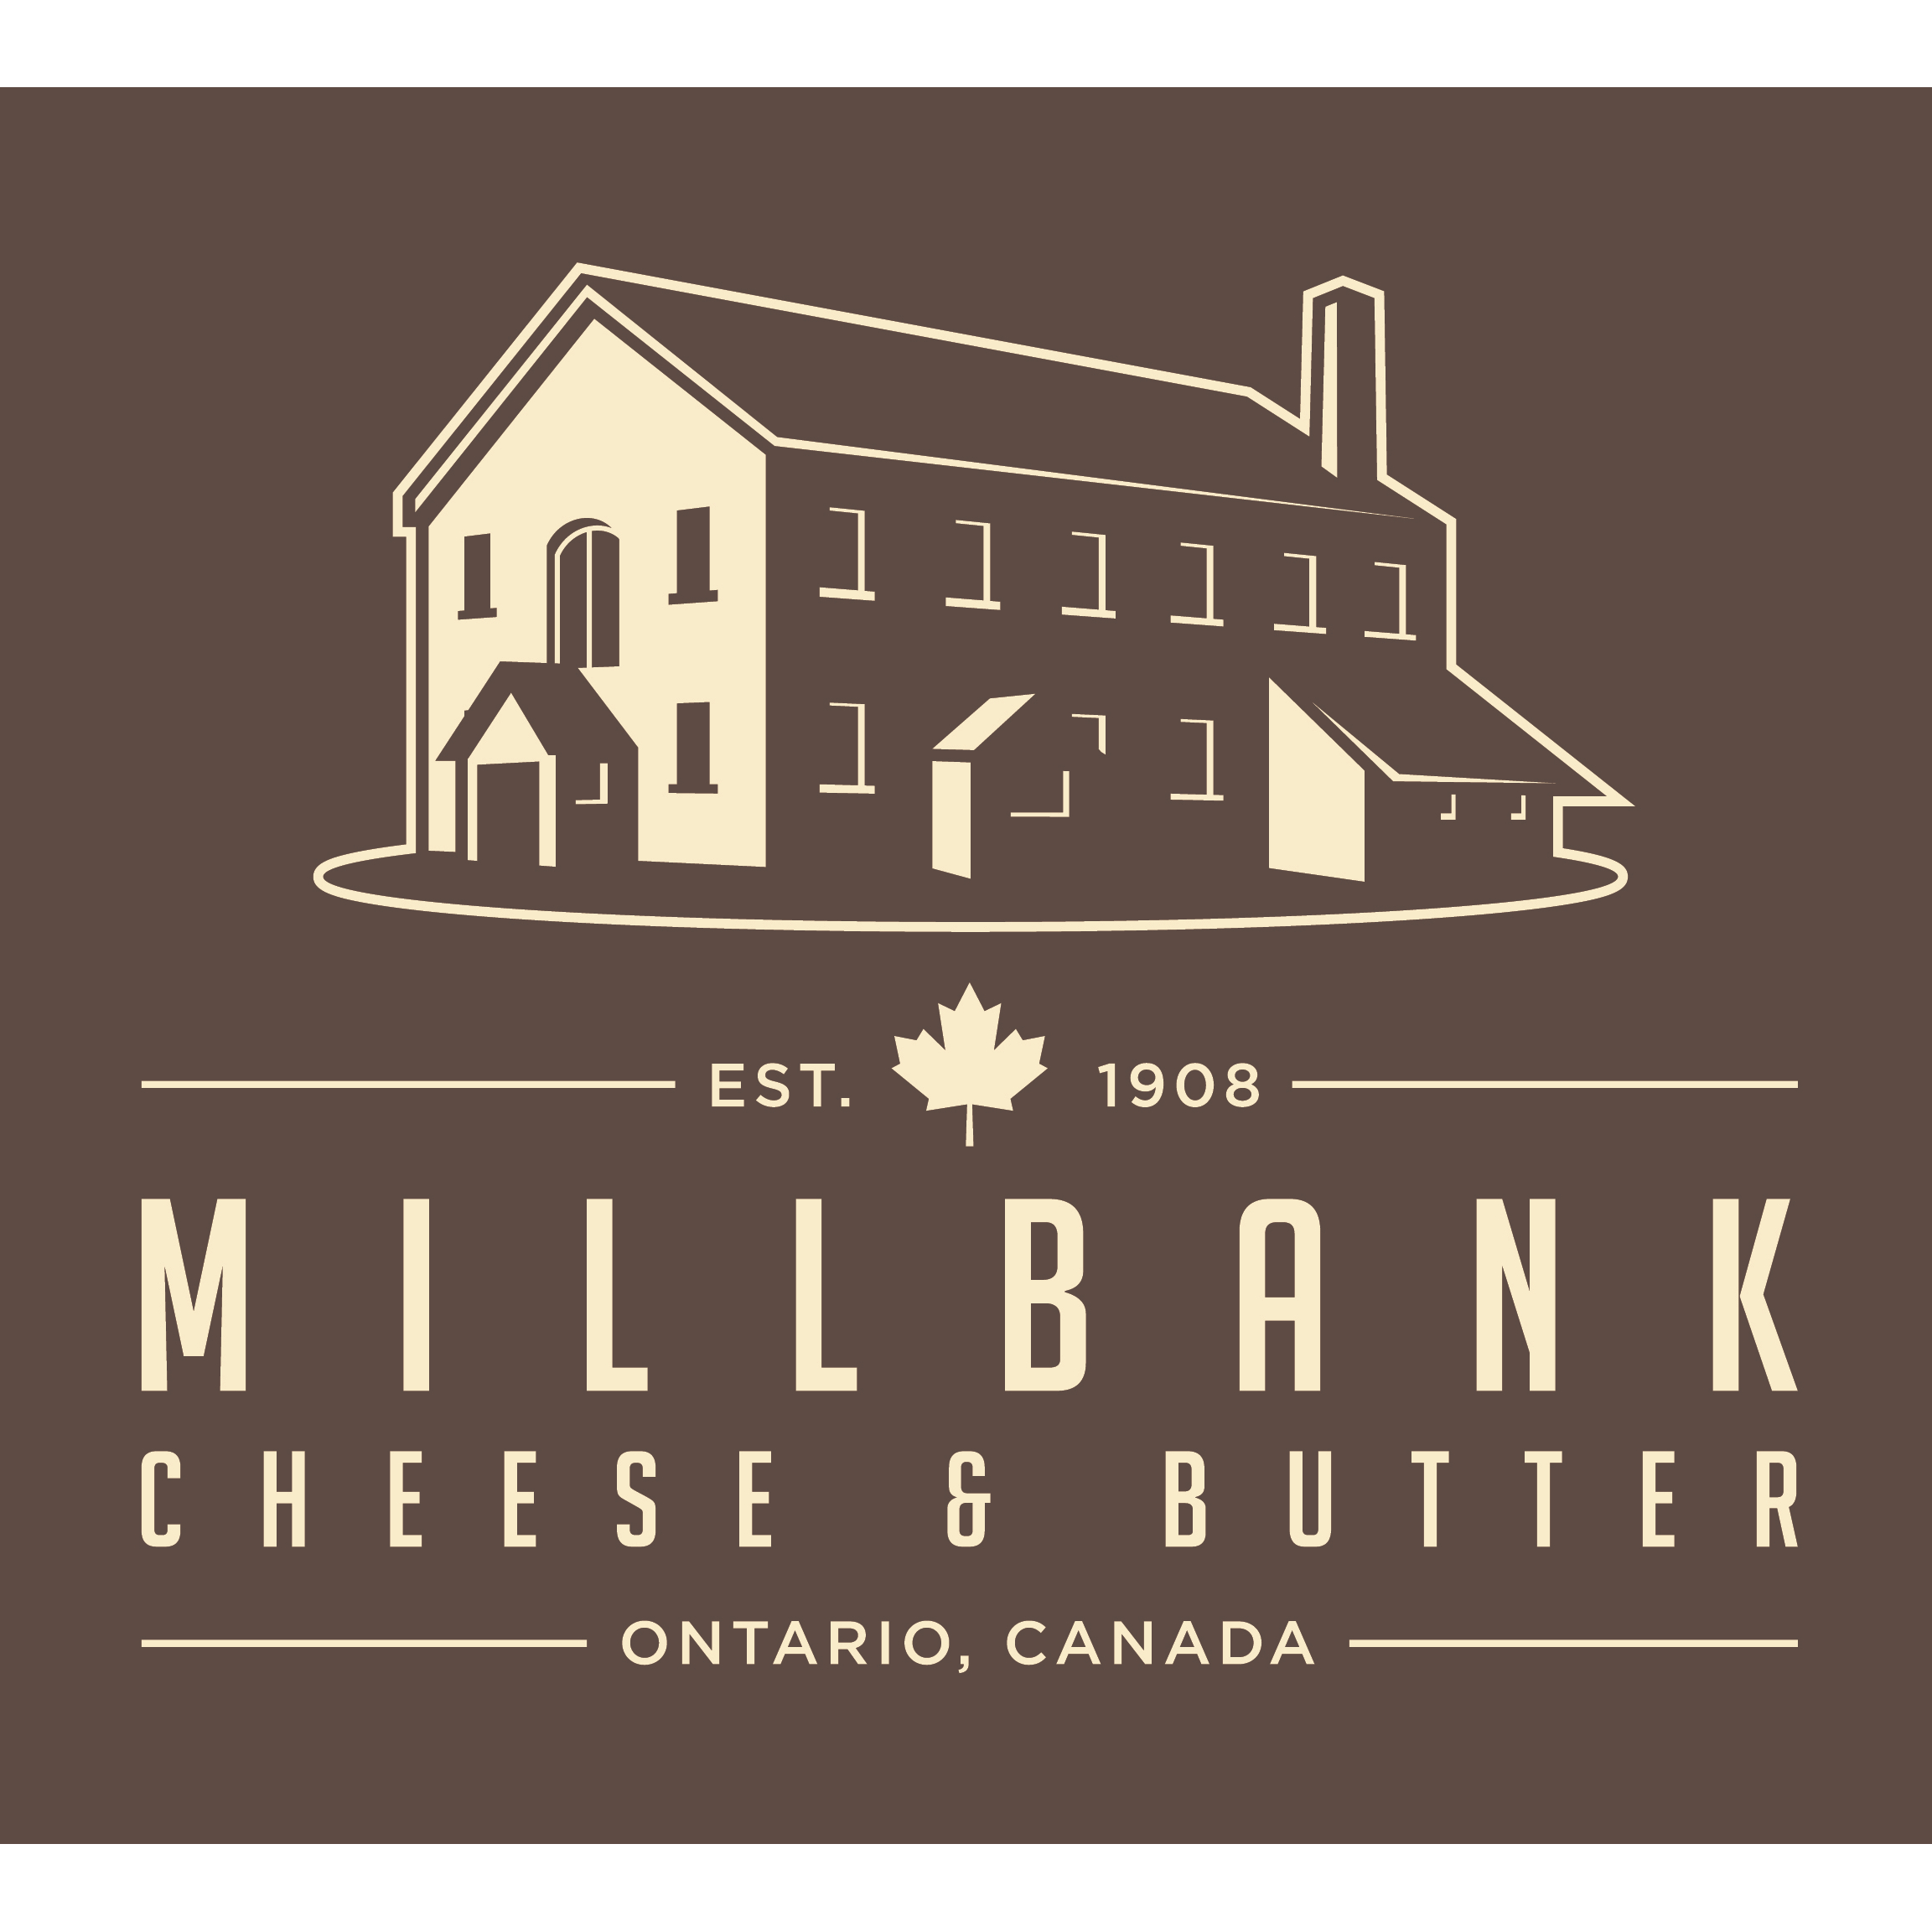 Millbank Cheese & Butter